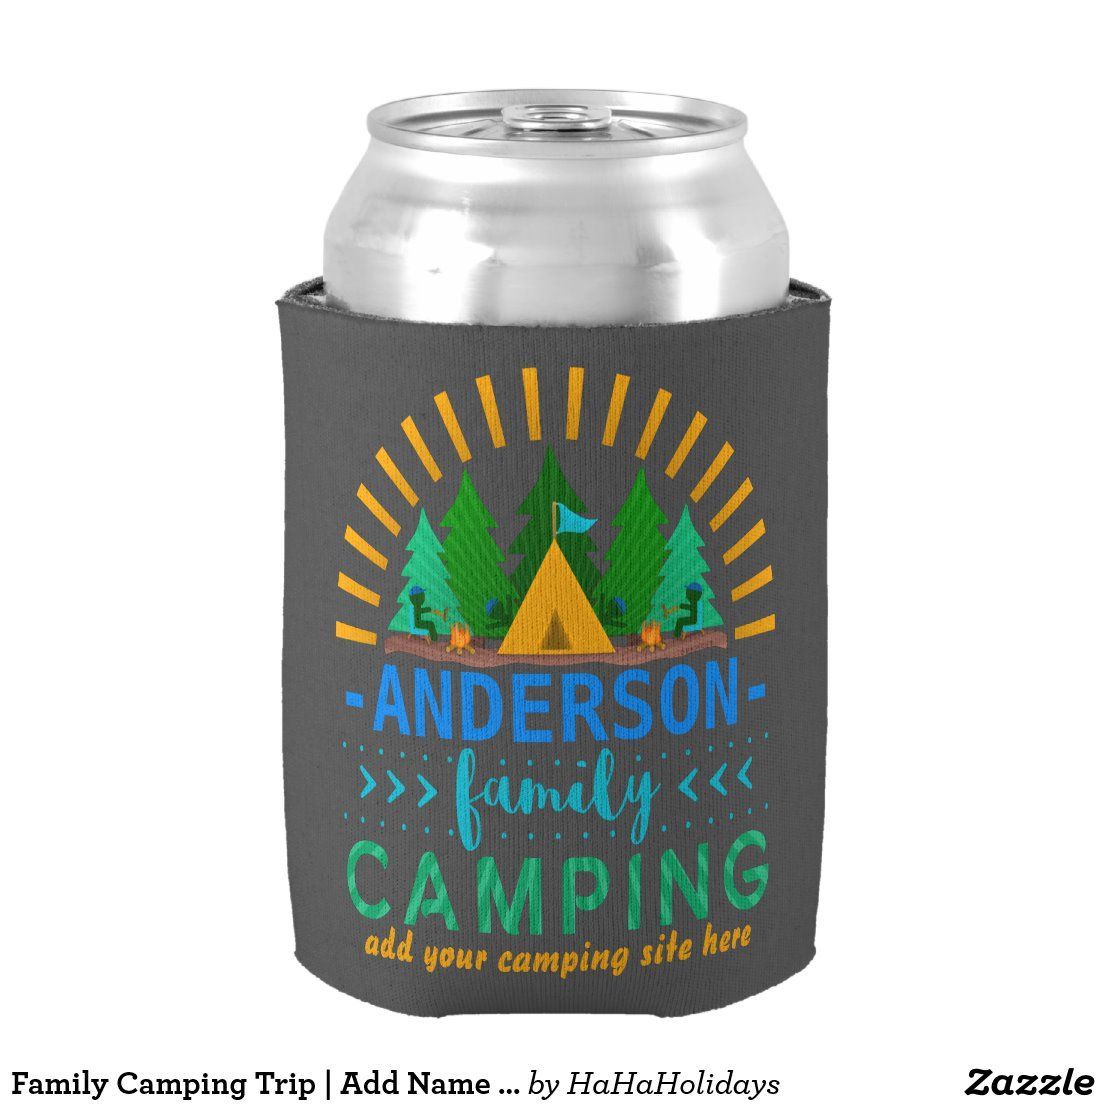 Family Camping Trip | Add Name and Campsite Gray Can Cooler -   19 holiday Summer camping ideas